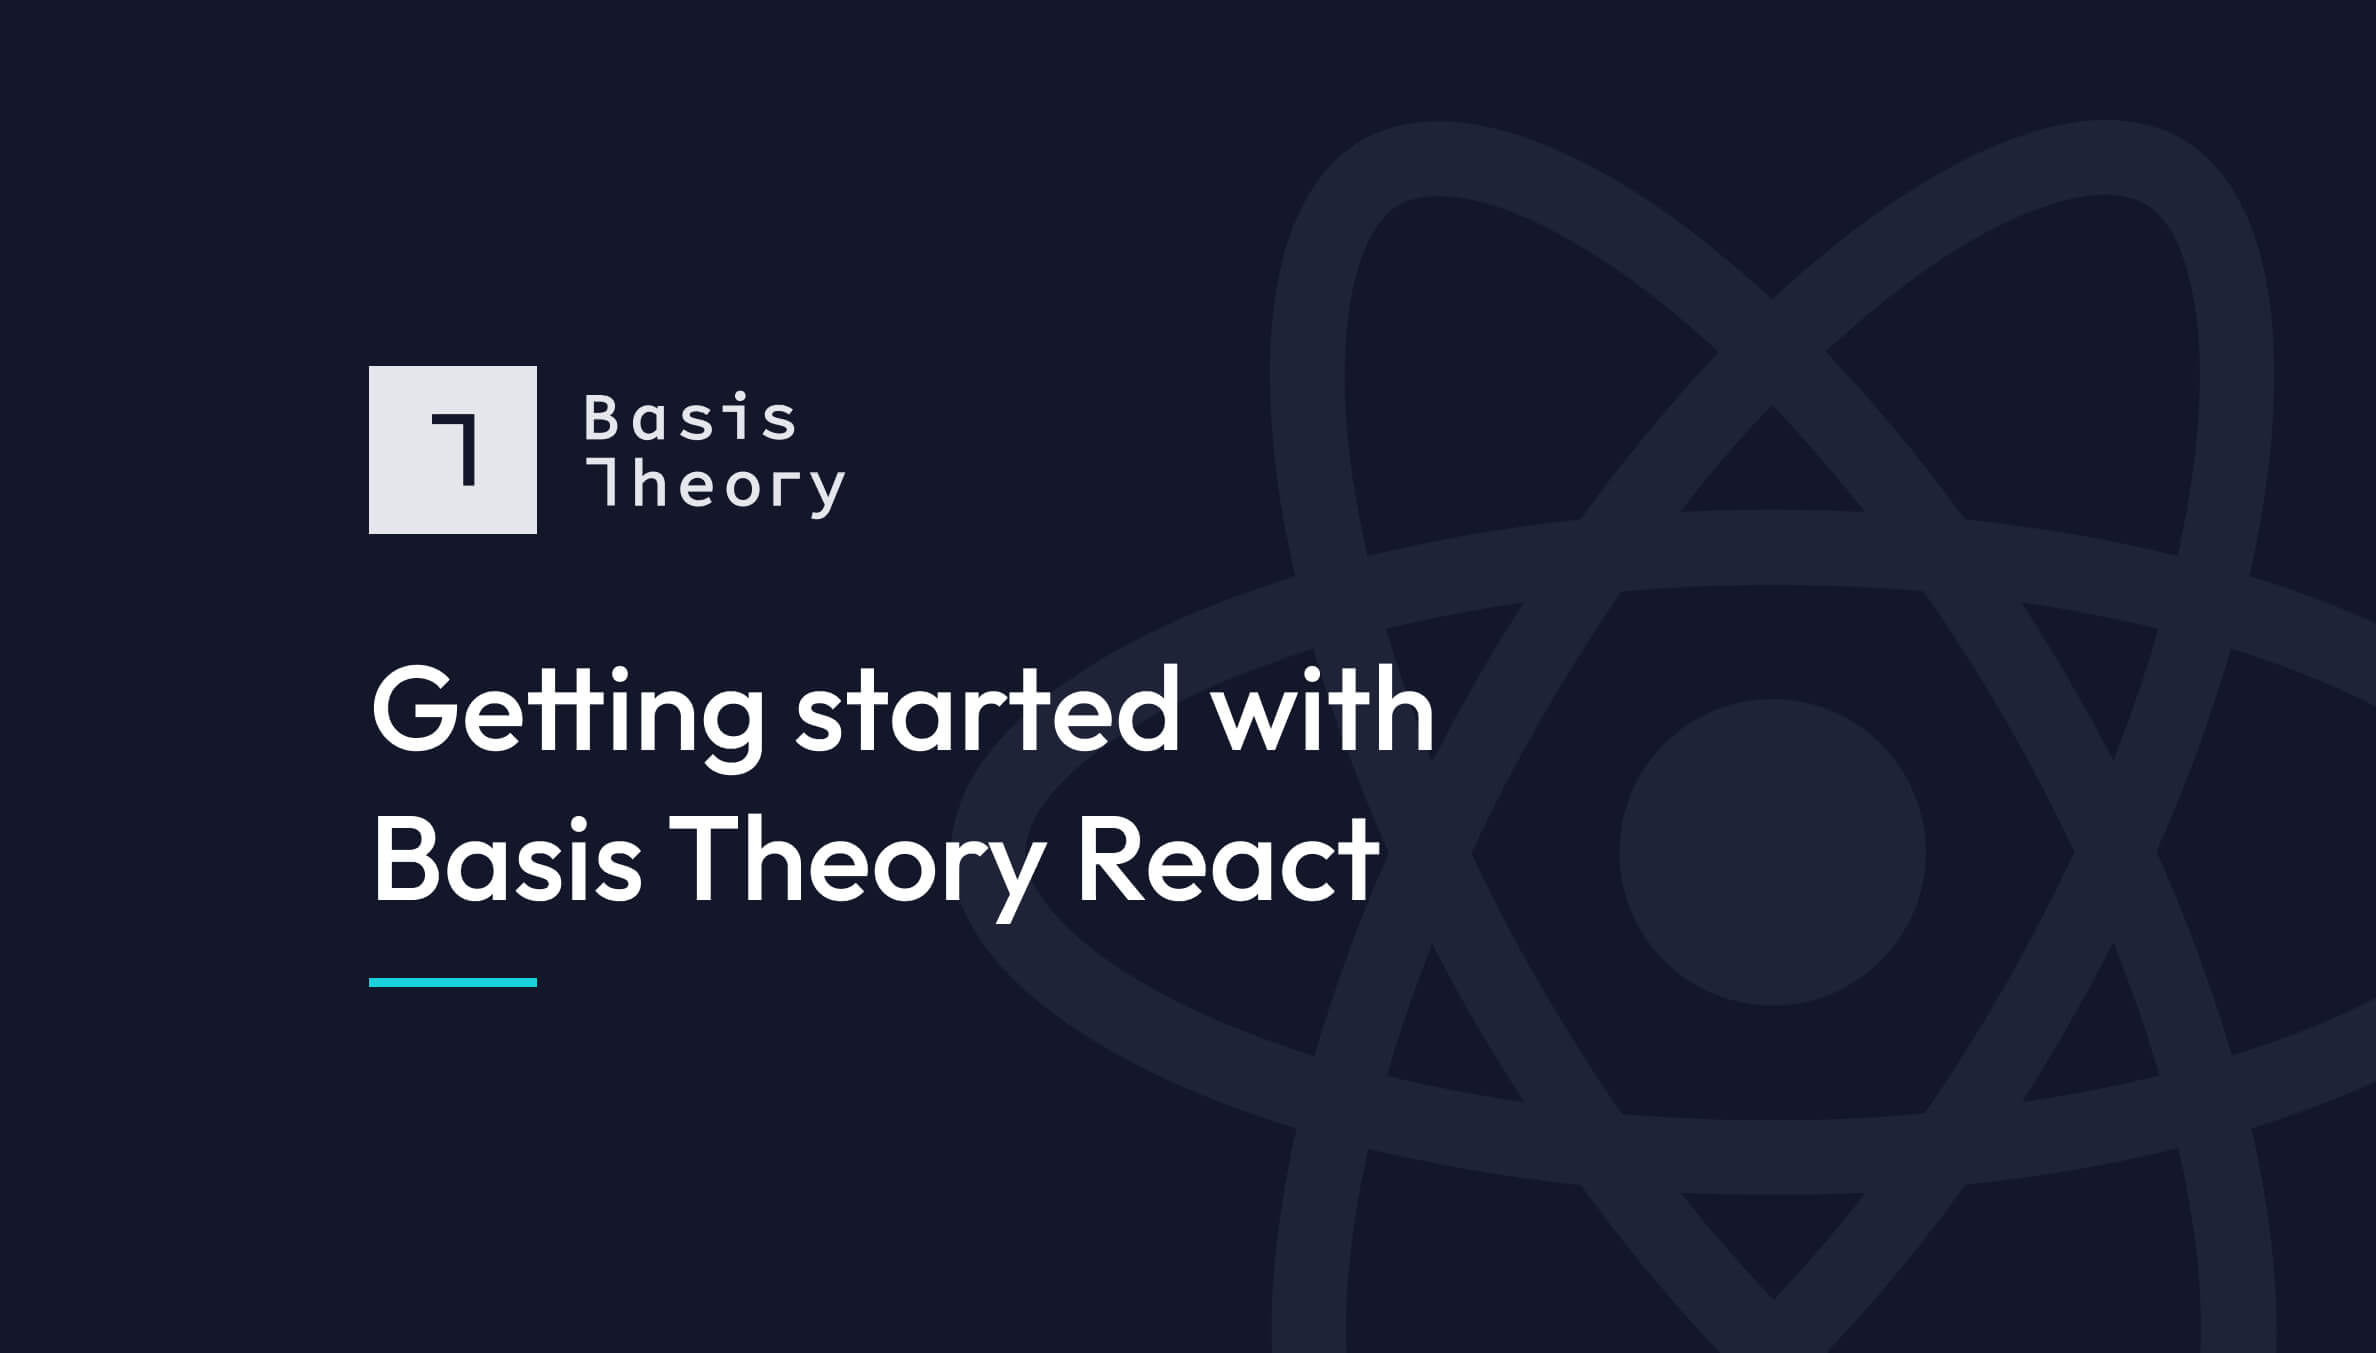 Getting started with Basis Theory React